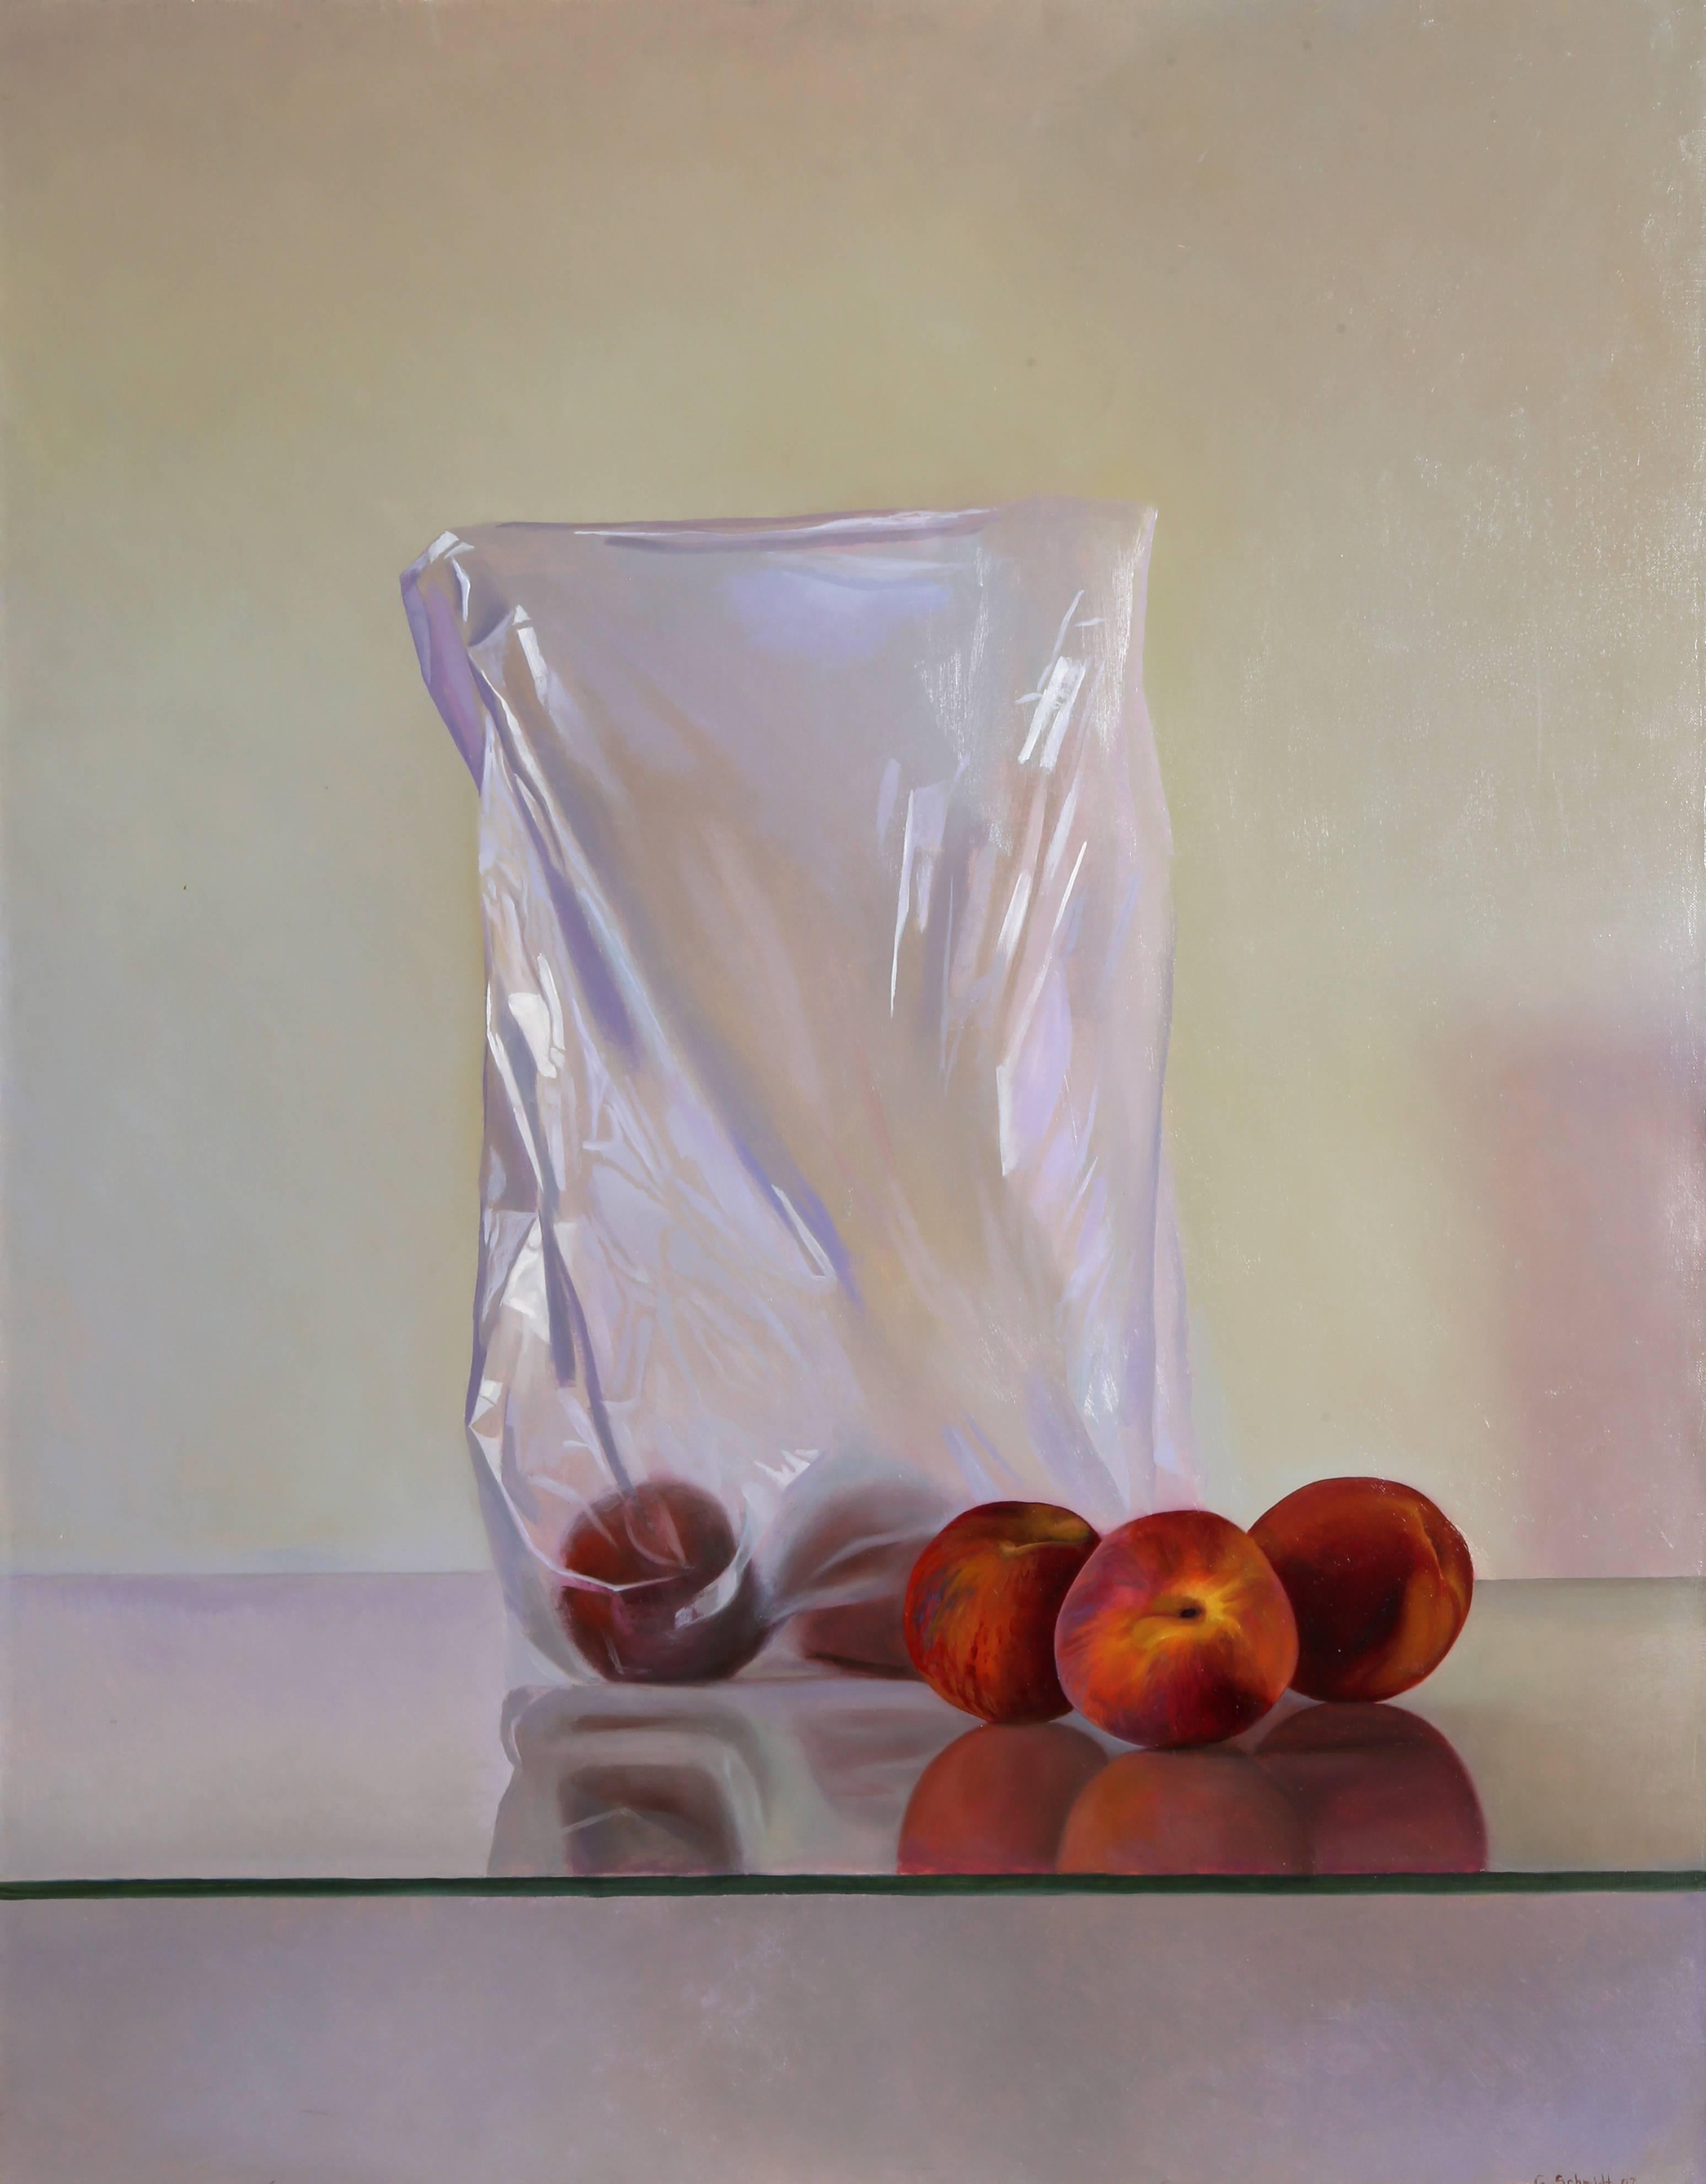 Artist: Gustavo Schmidt
Title: Peaches II
Year: 2007
Medium: Oil on Canvas with Varnish, signed l.r.
Size: 36 x 28 inches